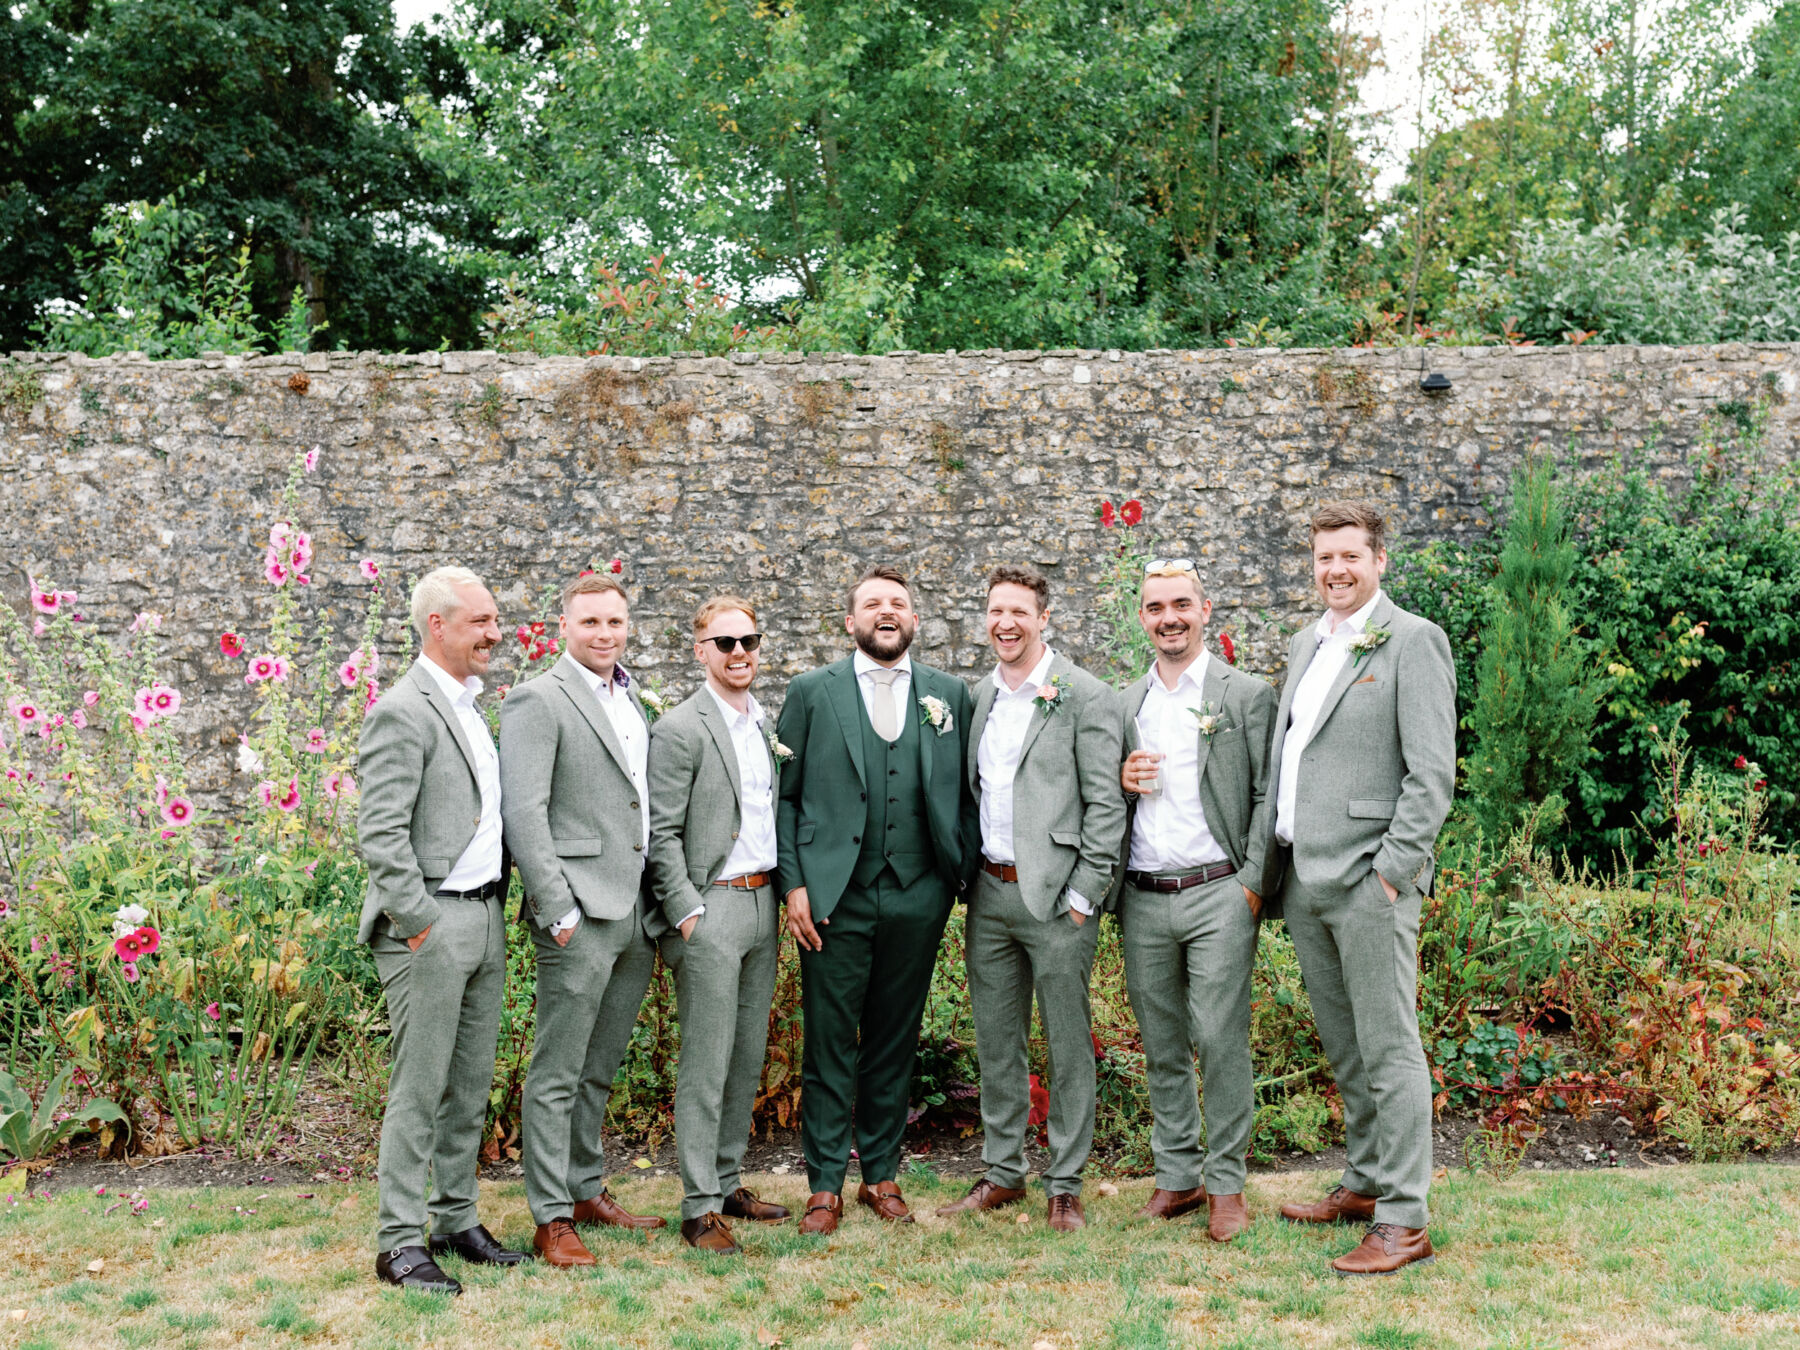 Groom in a green 3 piece suit and his groomsmen in pale grey suits.